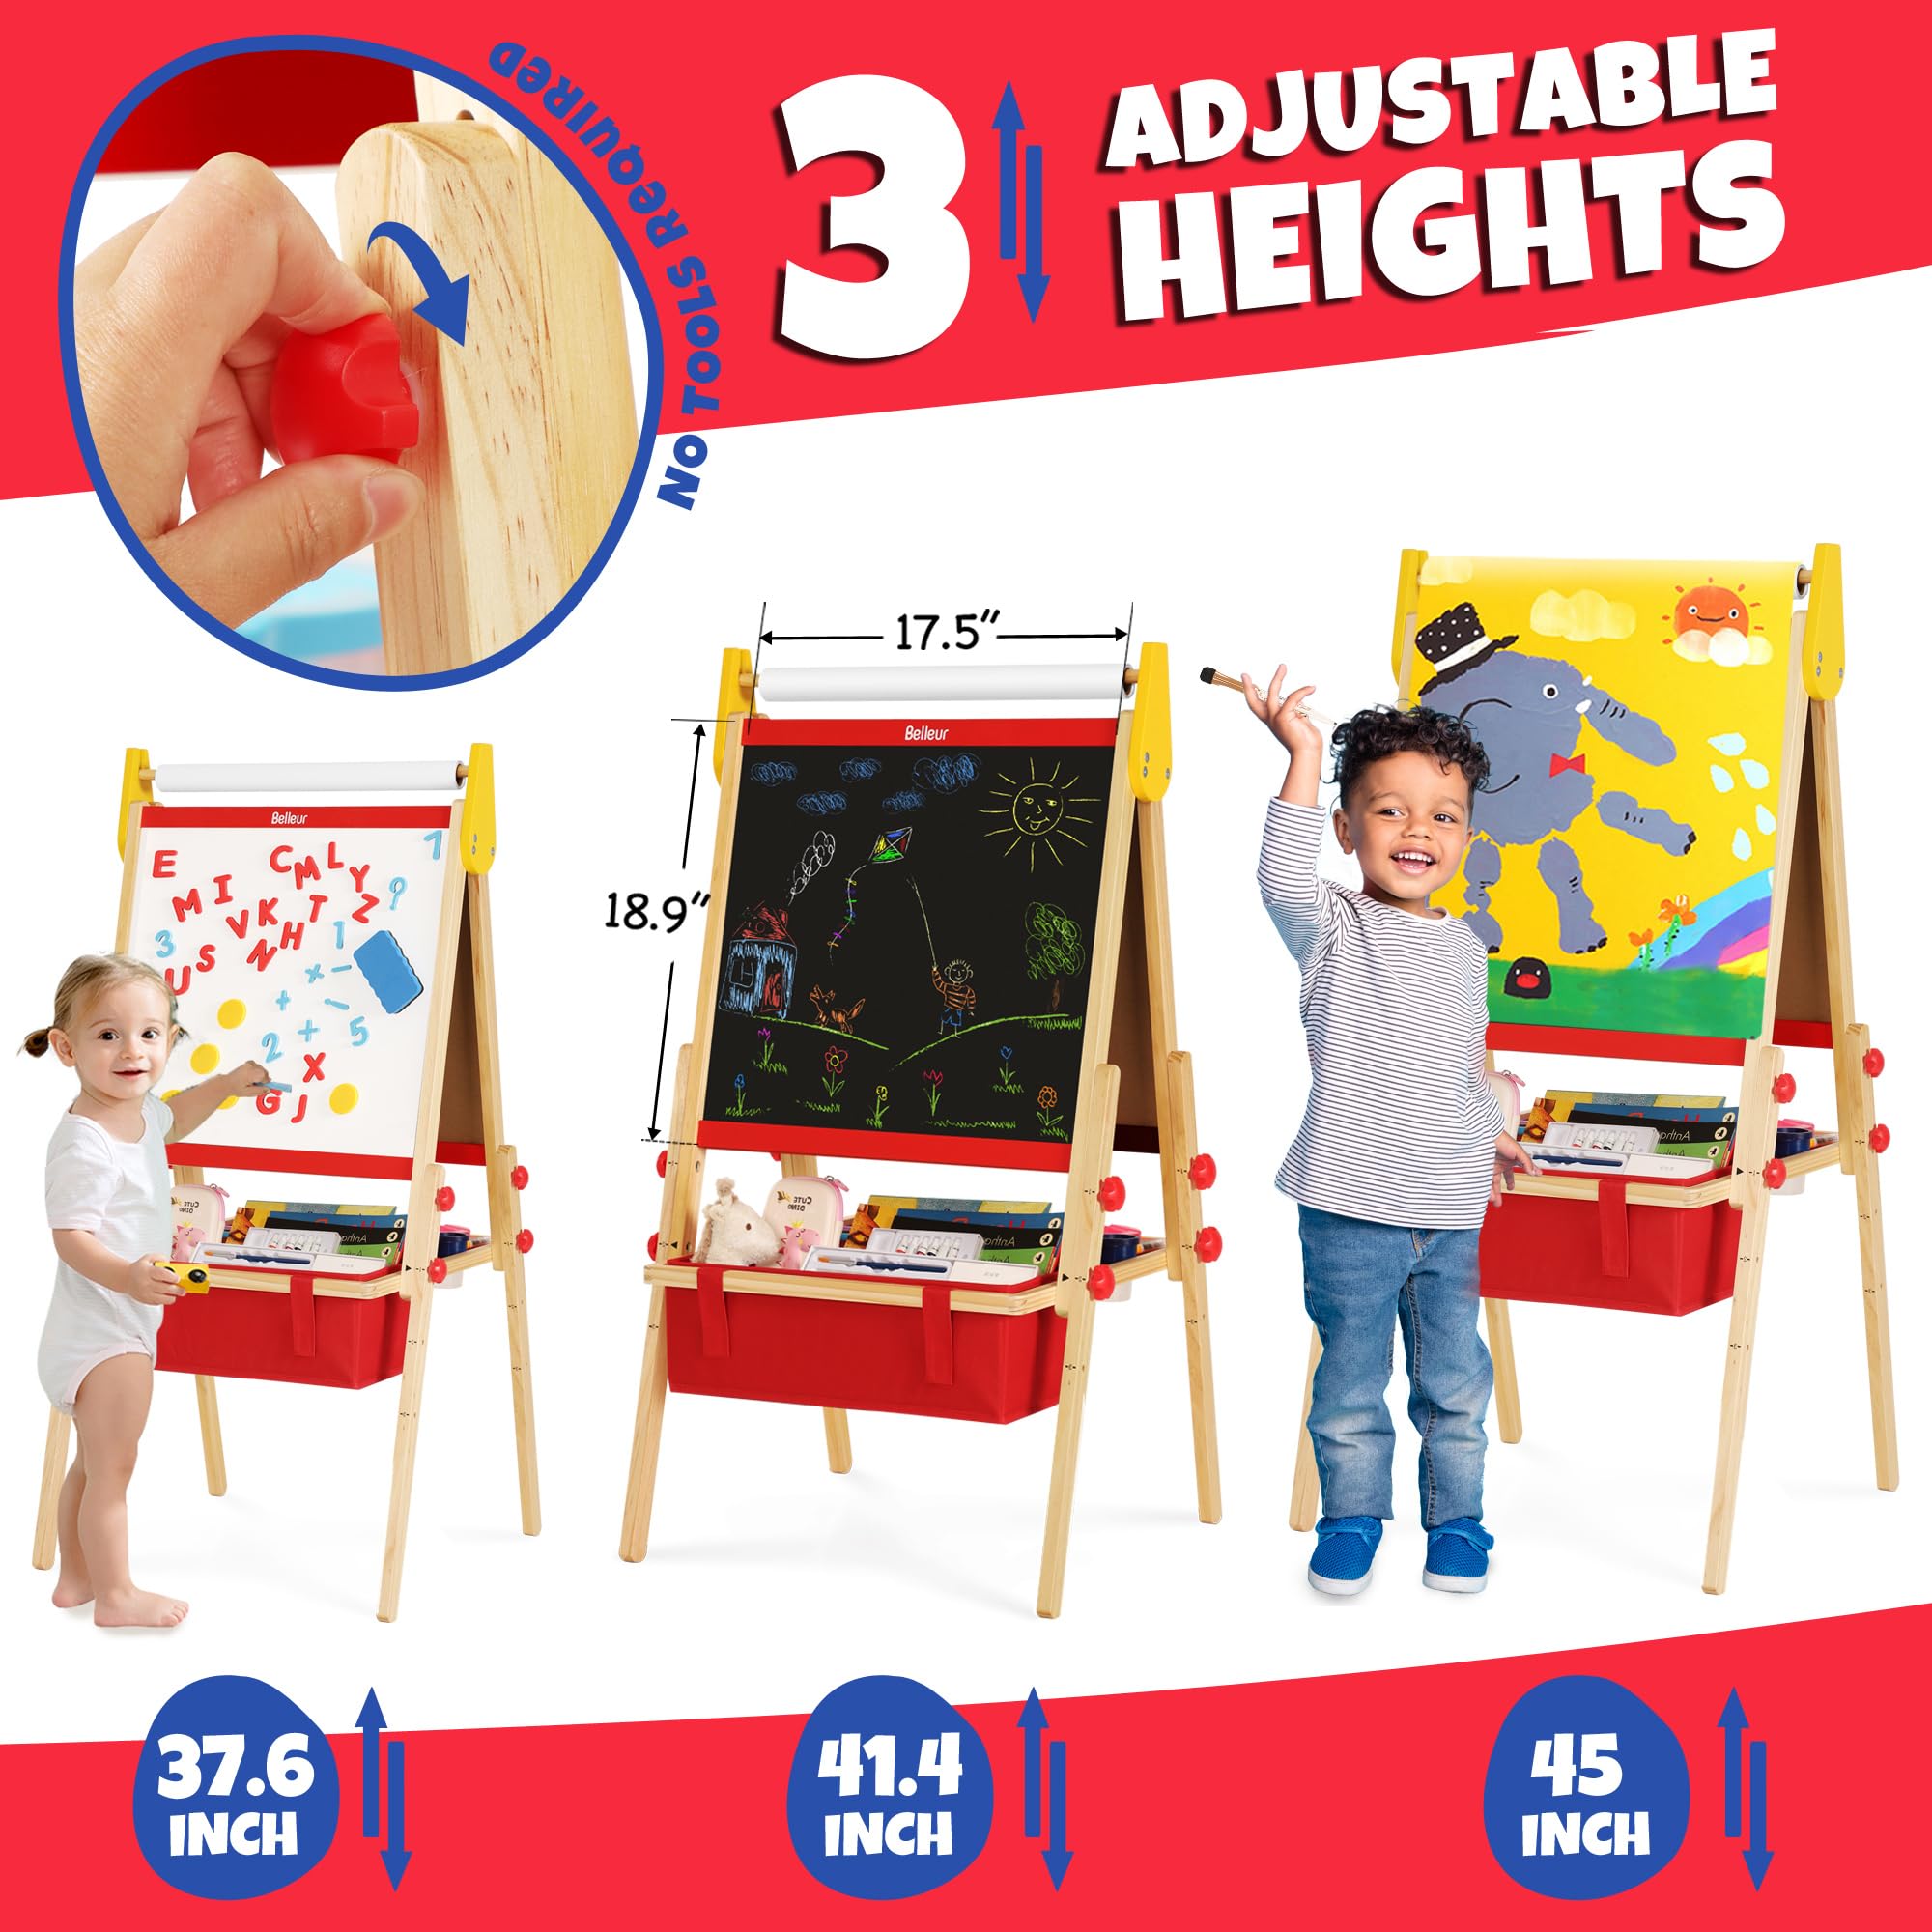 Belleur All-in-One Art Easel for Kid-100+ Accessories, Double-Sided Wooden Kid Easel with Chalkboard & Whiteboard, Finger Paints, Adjustable Art Kid Easel with Paper Roll for Toddler 2-8